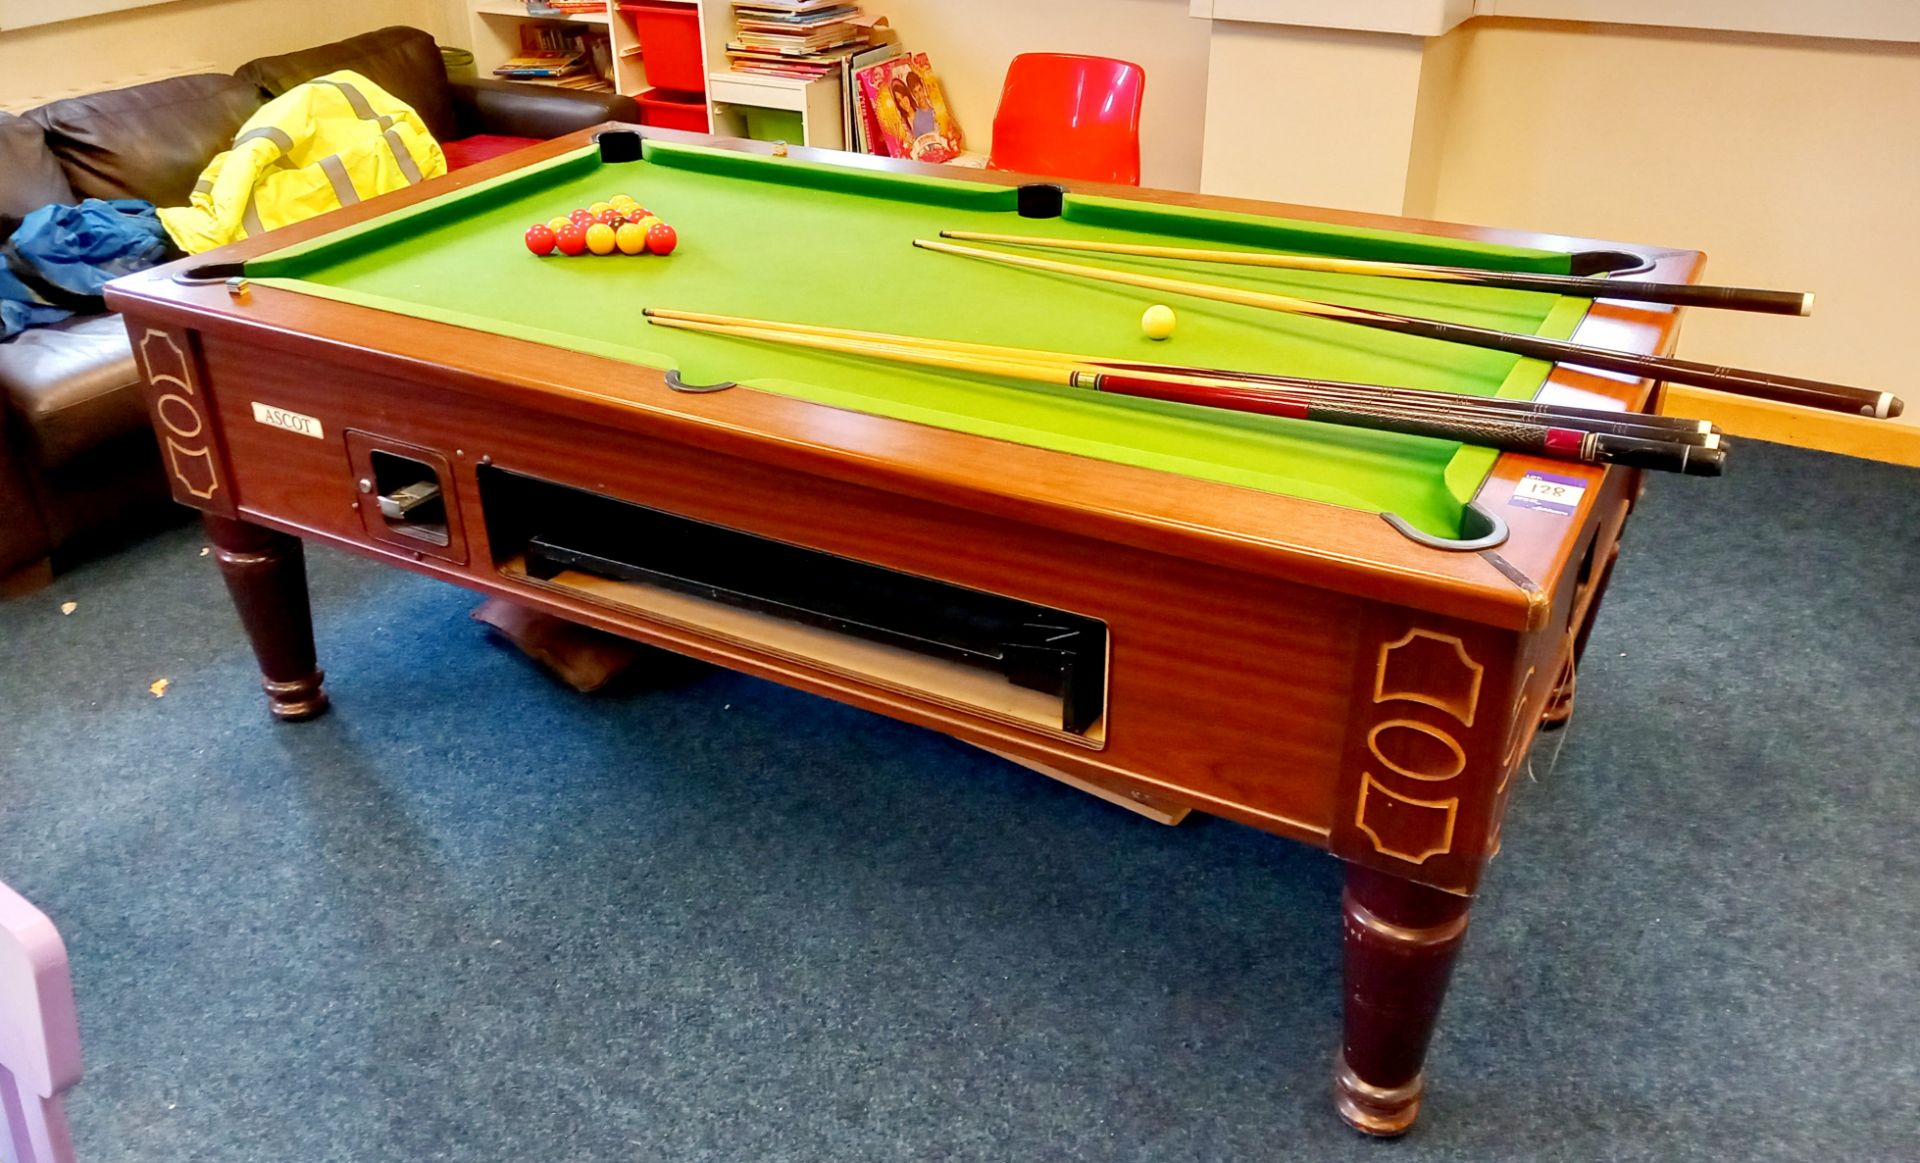 Ascot slate bed pool table (located on first floor)